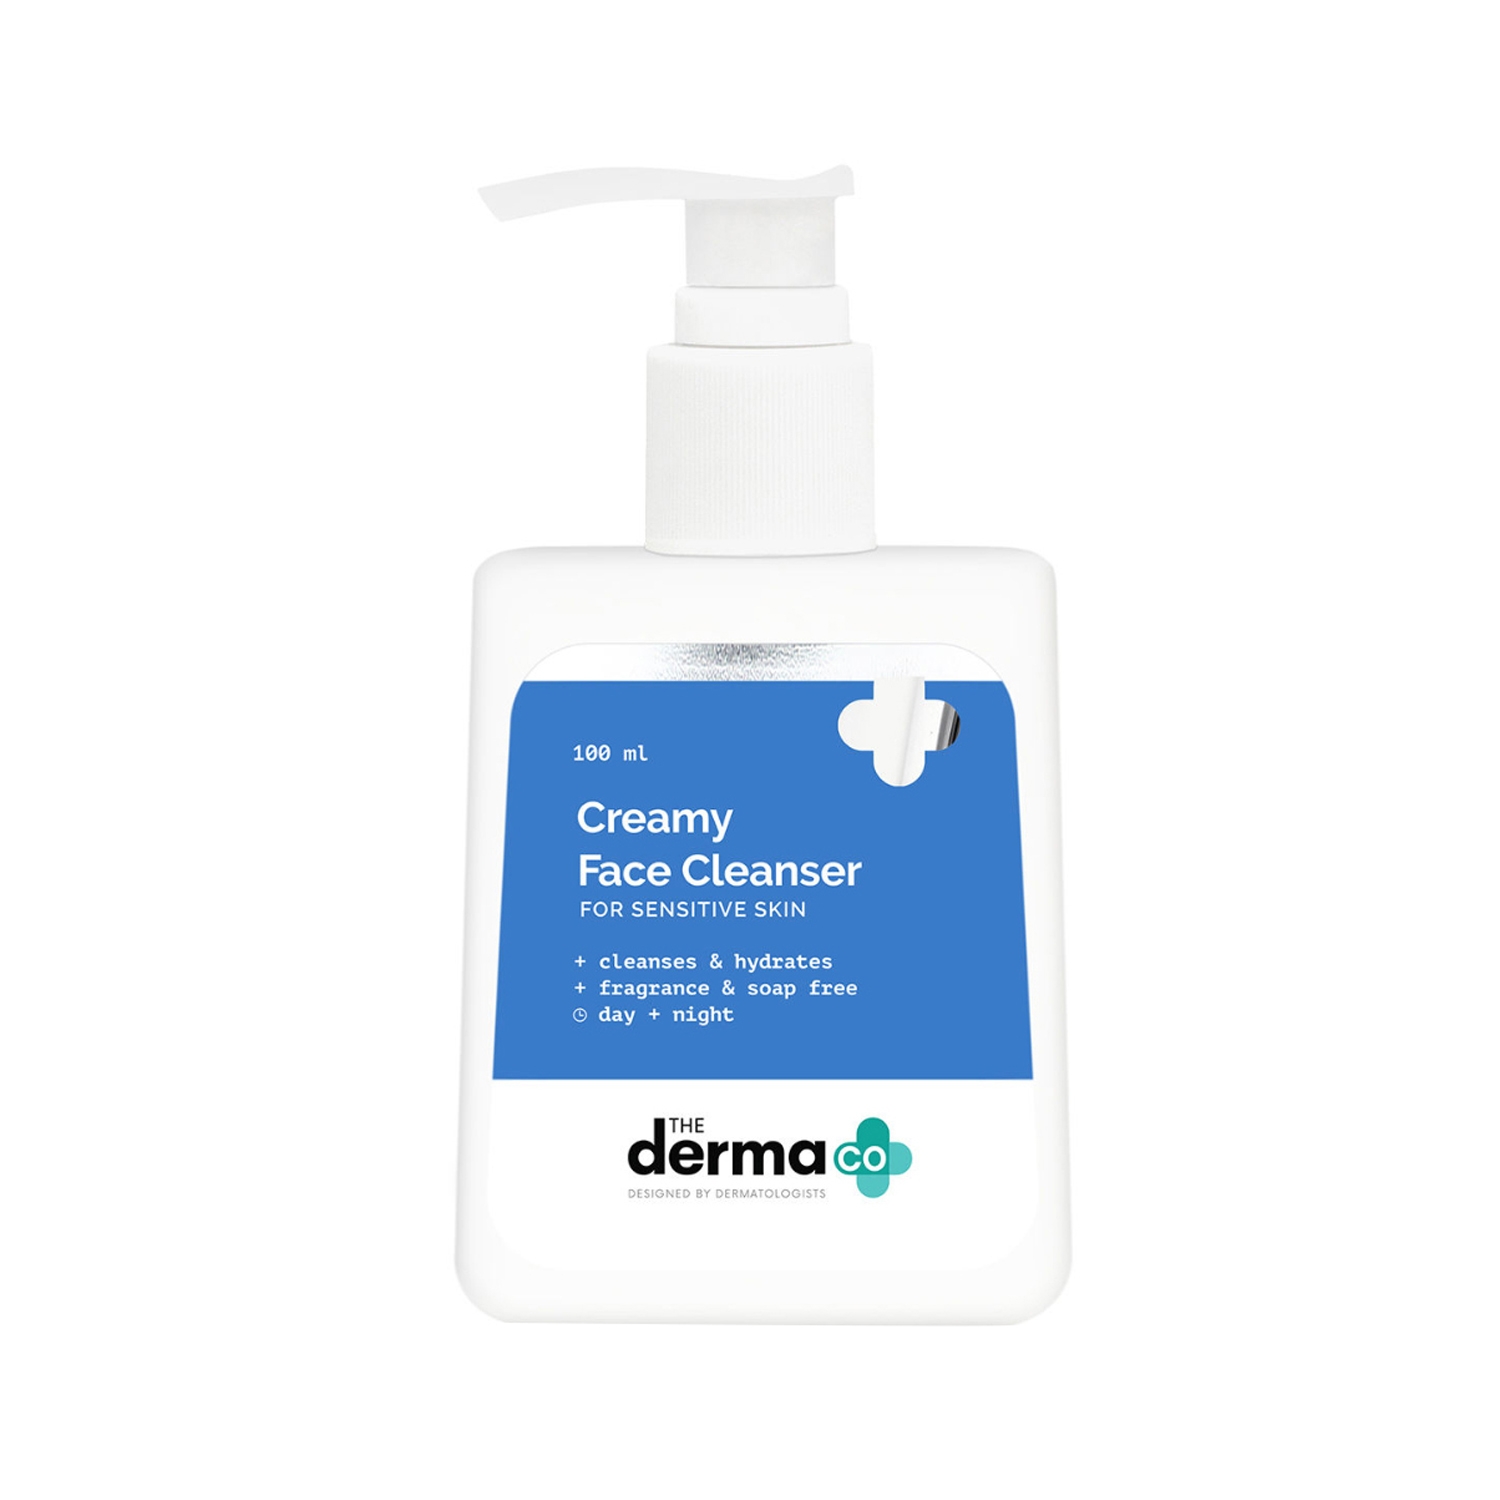 The Derma Co Creamy Face Cleanser (100ml)